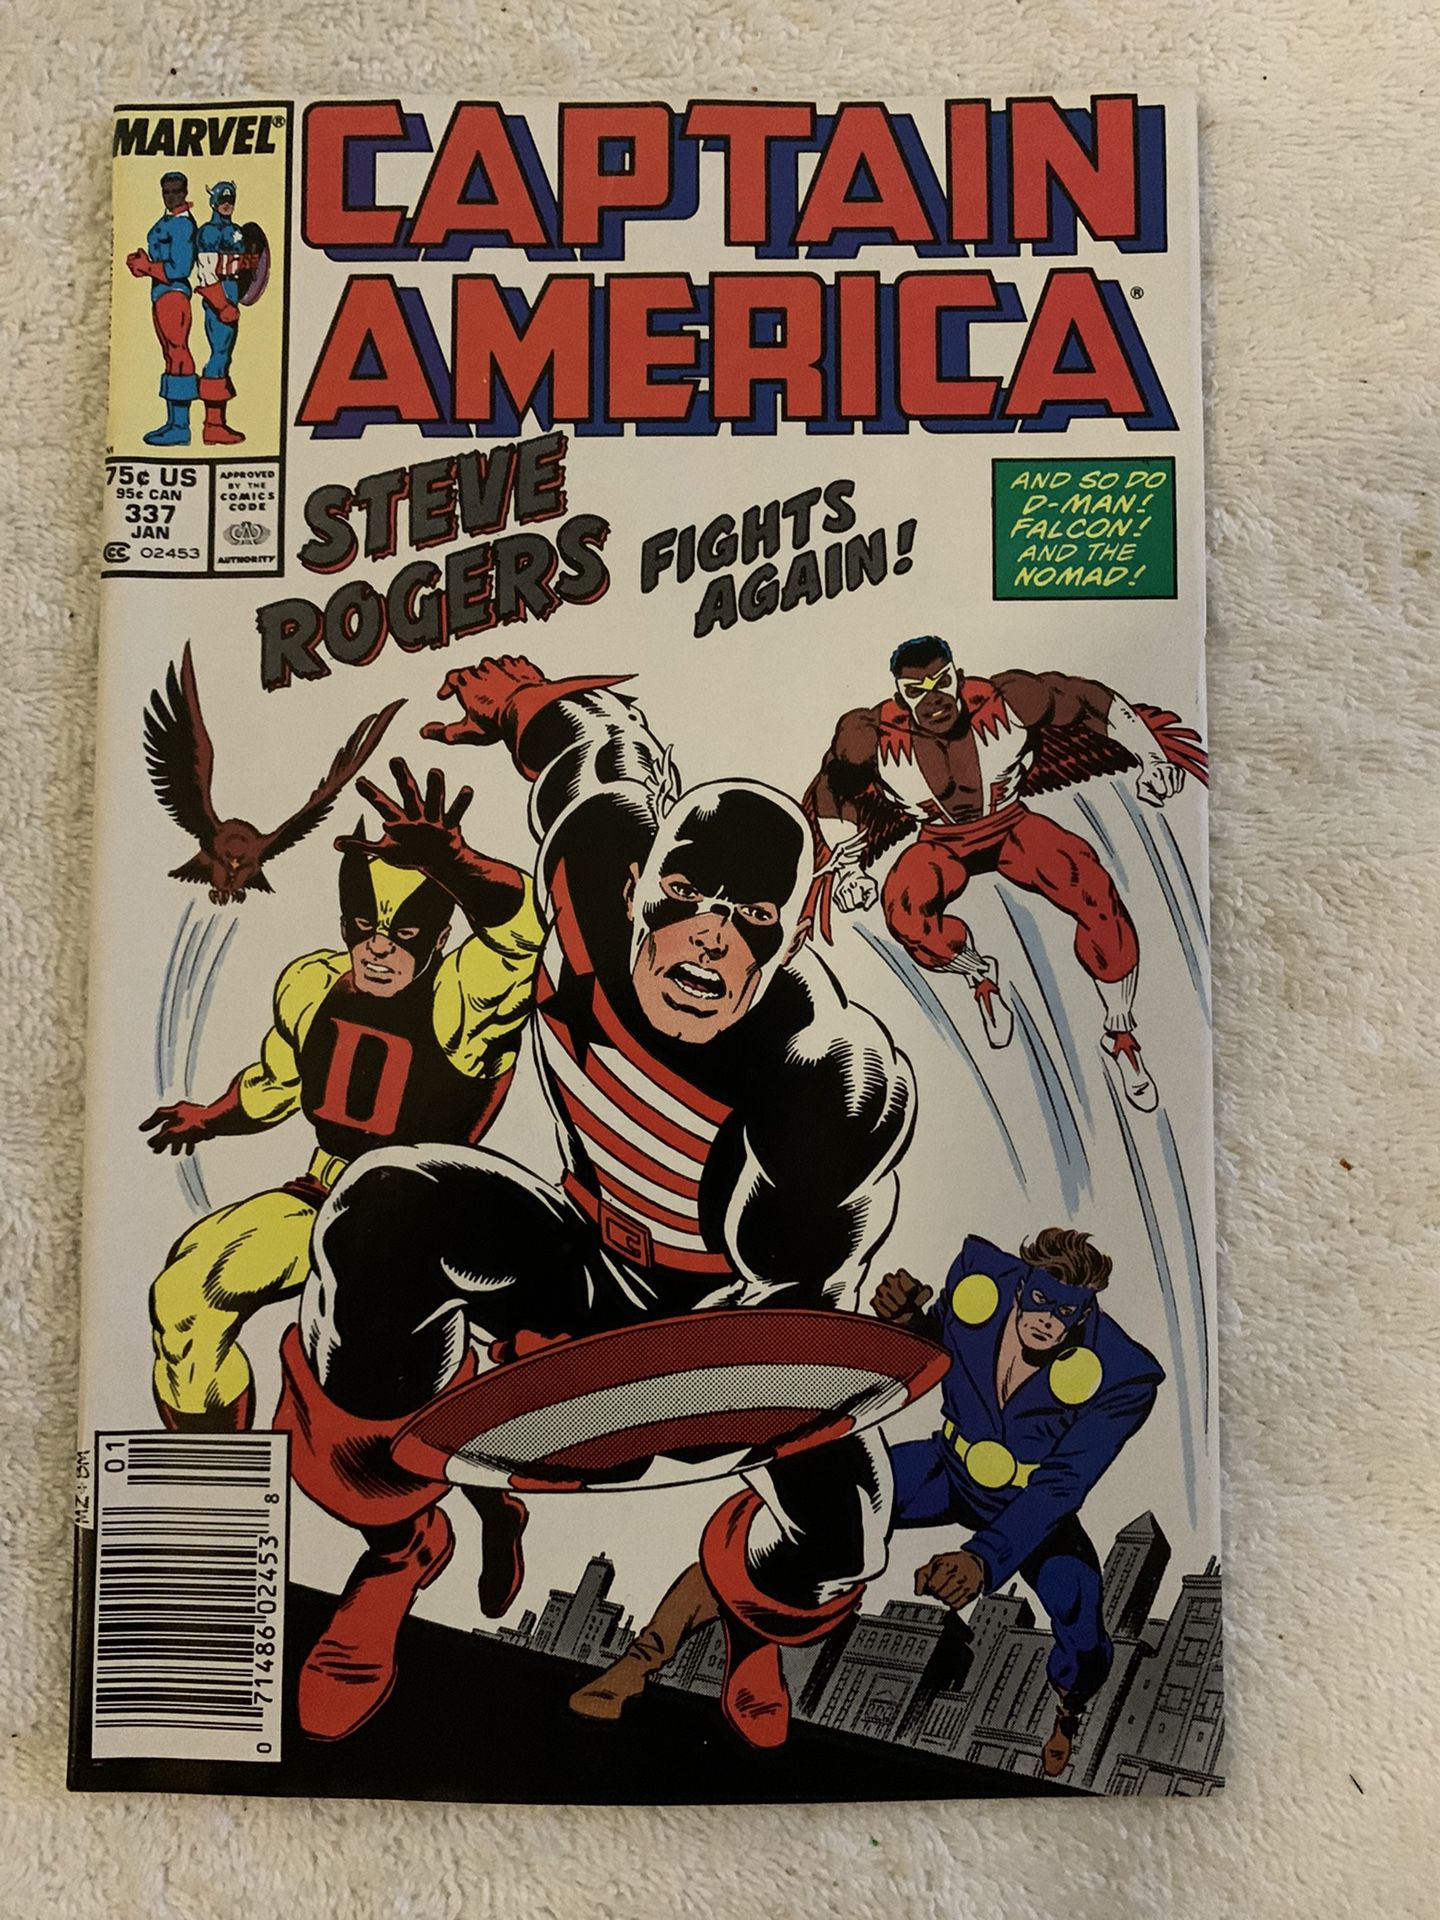 CAPTAIN AMERICA 1st APPEARANCE OF STEVE ROGERS (CAPTAIN ) AS A U. S. AGENT ISSUE 337